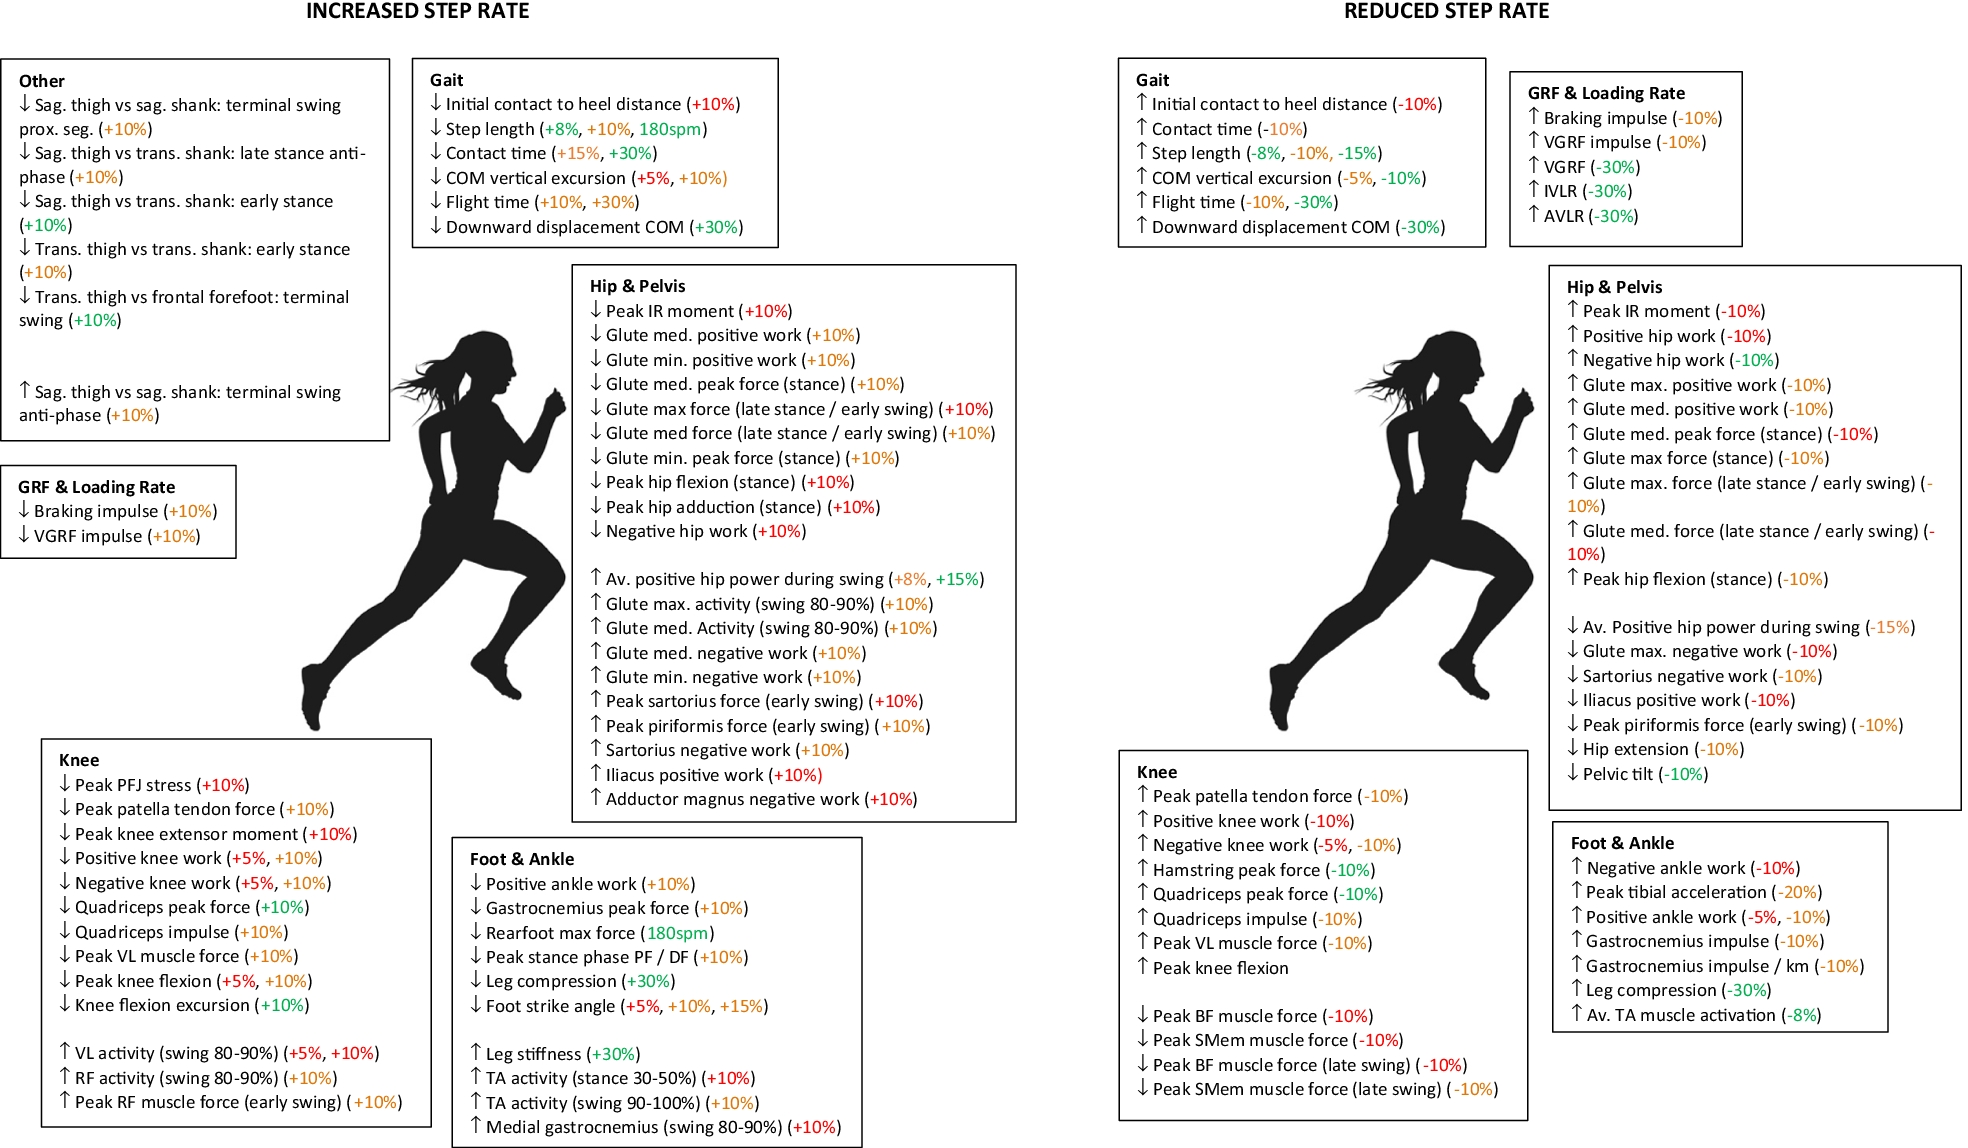 Step frequency (cadence) and injury risk and performance in runners from Thomas Solomon.